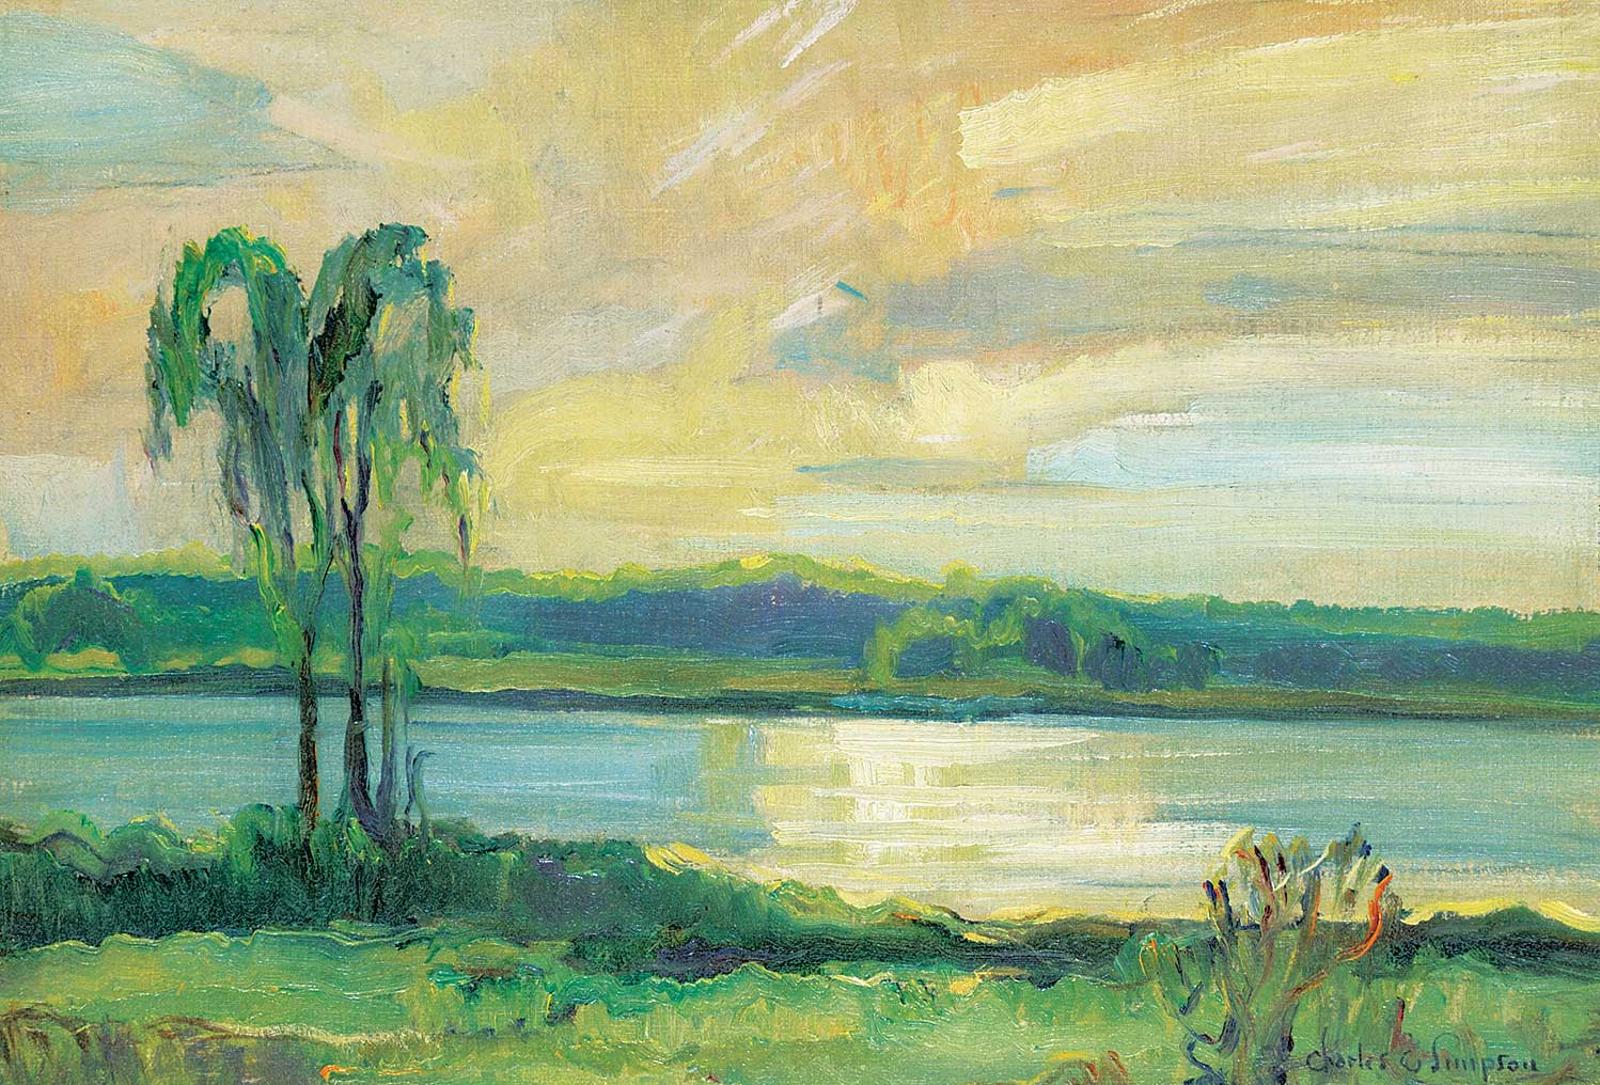 Charles Walter Simpson (1878-1942) - Untitled - Sunset at the Lake